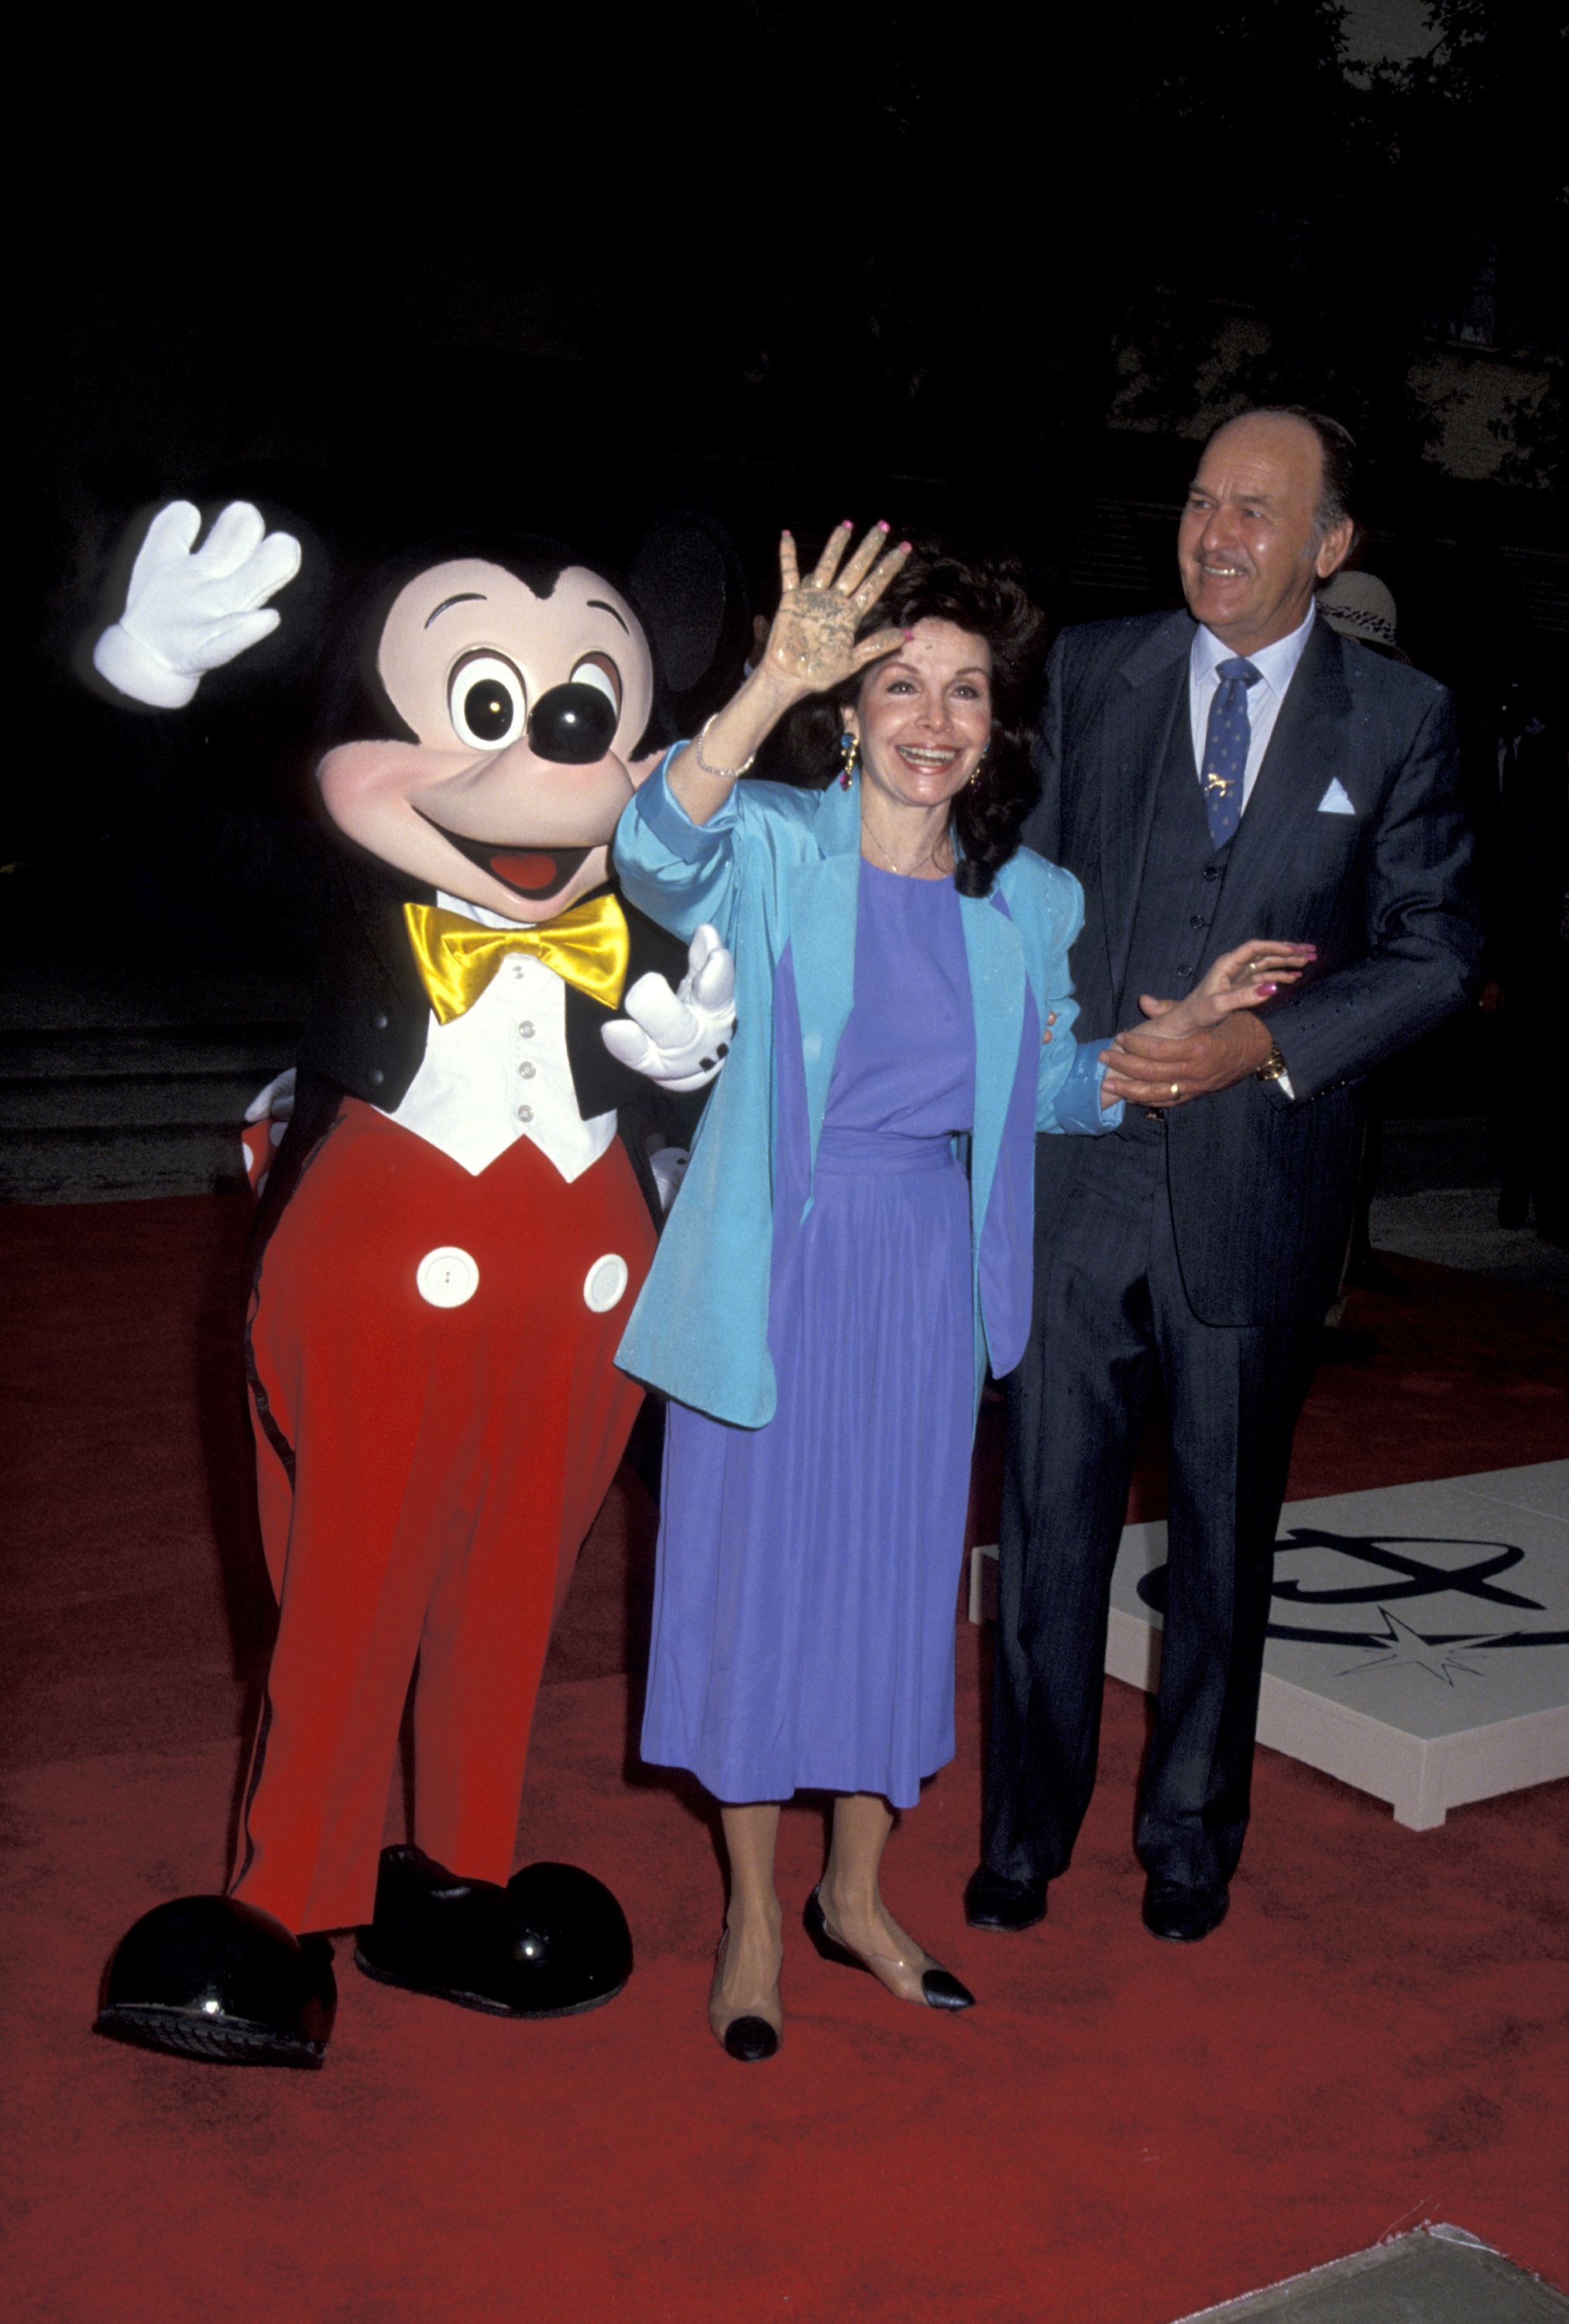 Annette Funicello and Glen Holt with Mickey Mouse during Disney Legends Awards at Walt Disney Studios in Burbank, California, United States. | Source: Getty Images